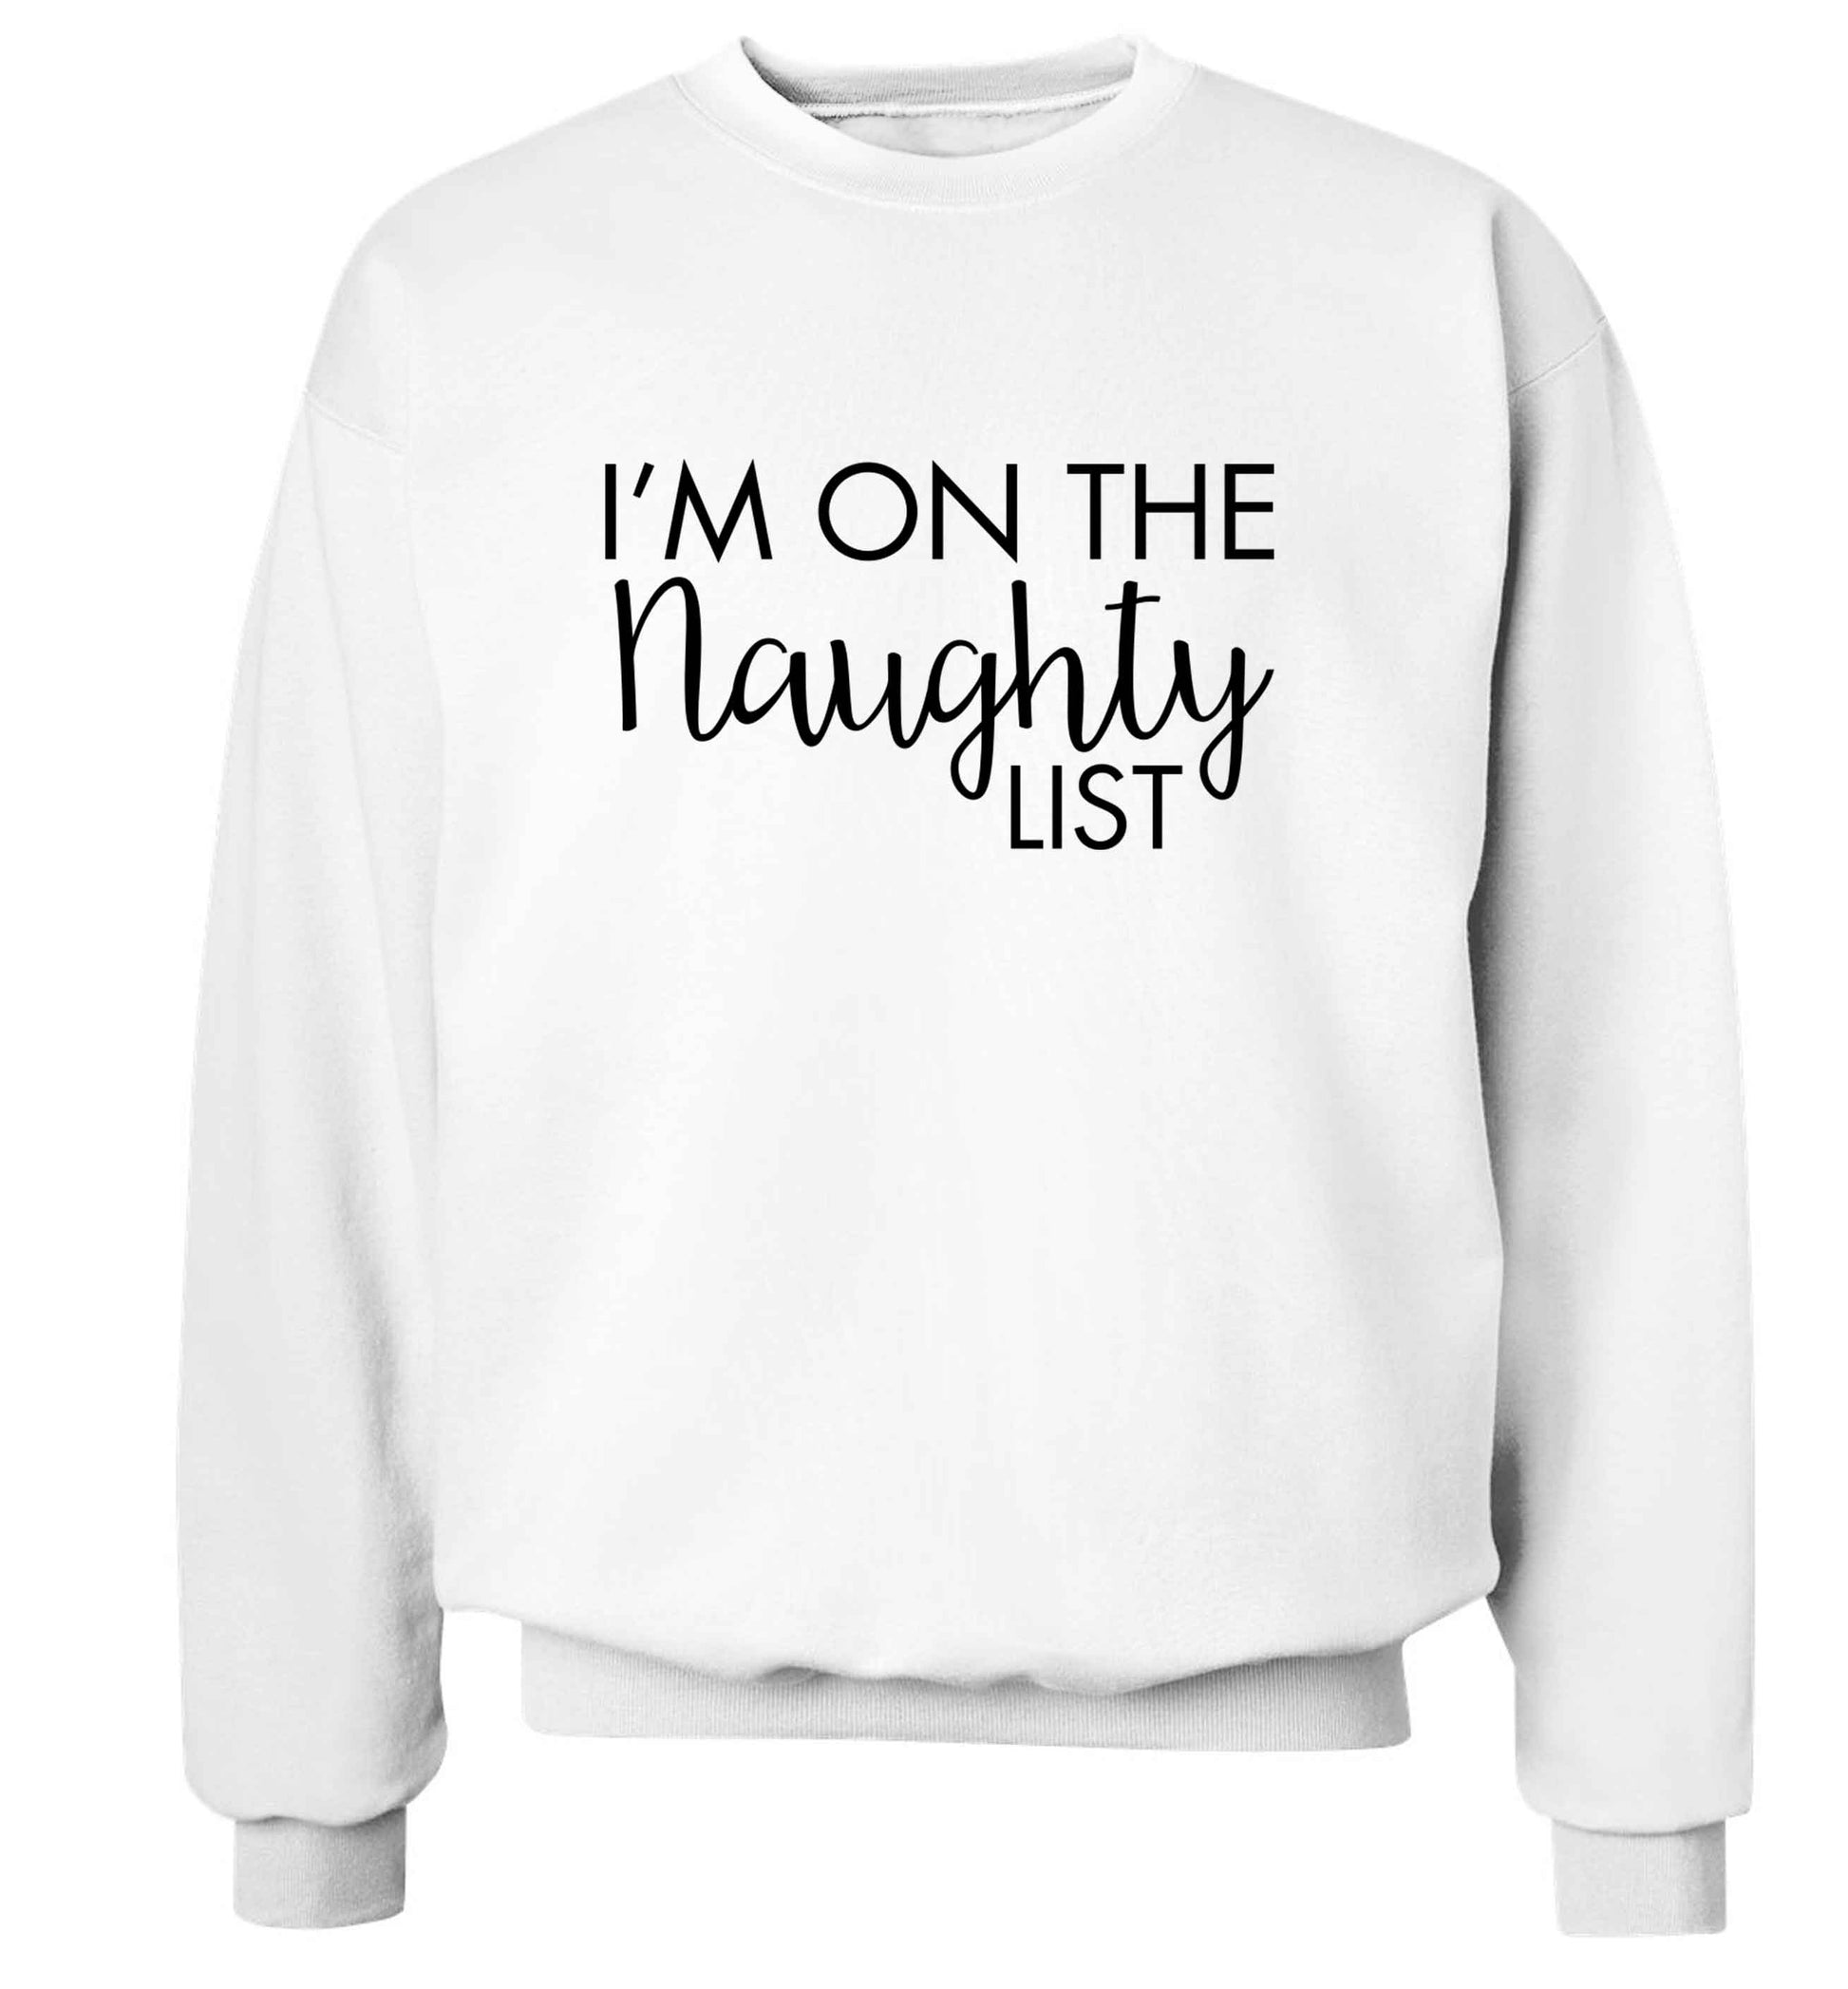 I'm on the naughty list adult's unisex white sweater 2XL